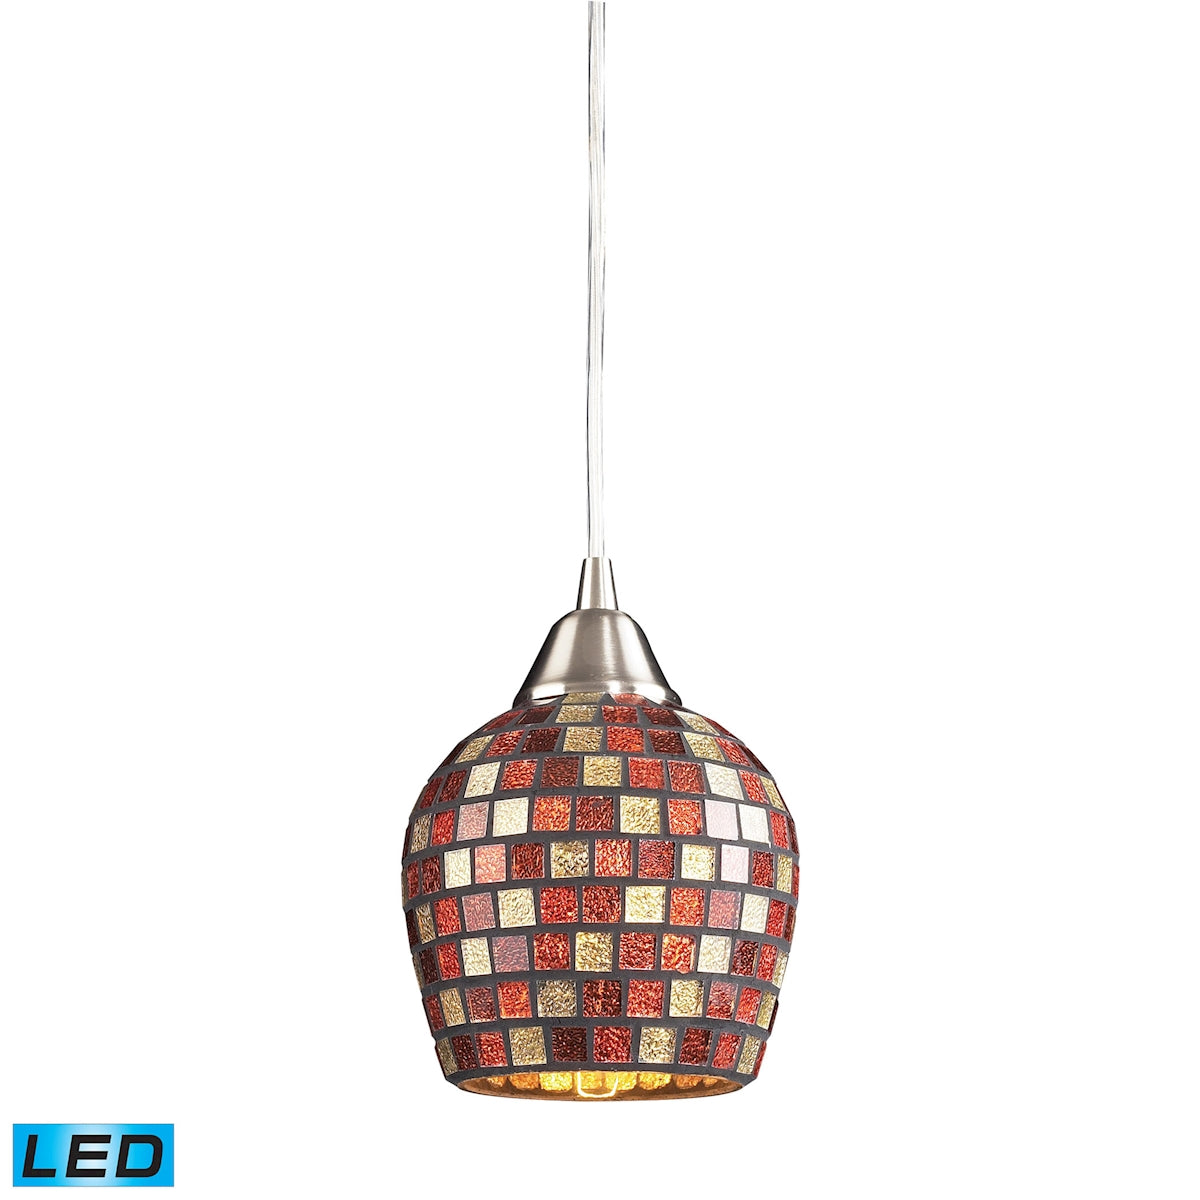 ELK Lighting 528-1MLT-LED - Fusion 5" Wide 1-Light Mini Pendant in Satin Nickel with Multi-colored M